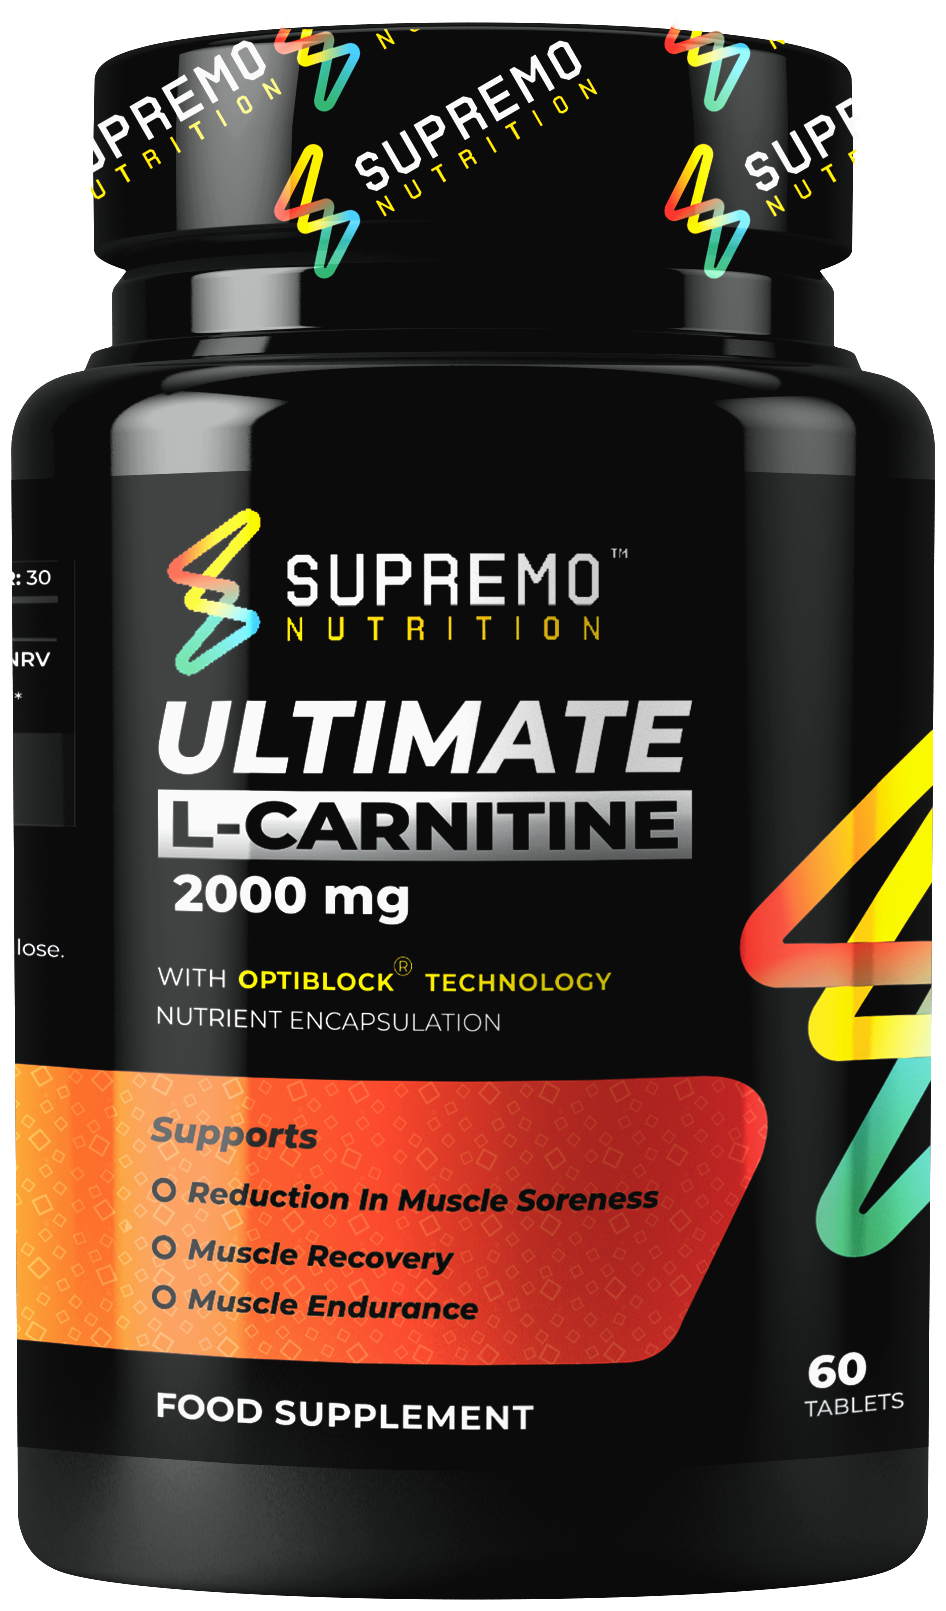 Ultimate L-Carnitine 2000 mg, Supports Reduction In Muscle Soreness, Supports Muscle Recovery, Supports Muscle Endurance, 60 Tablets